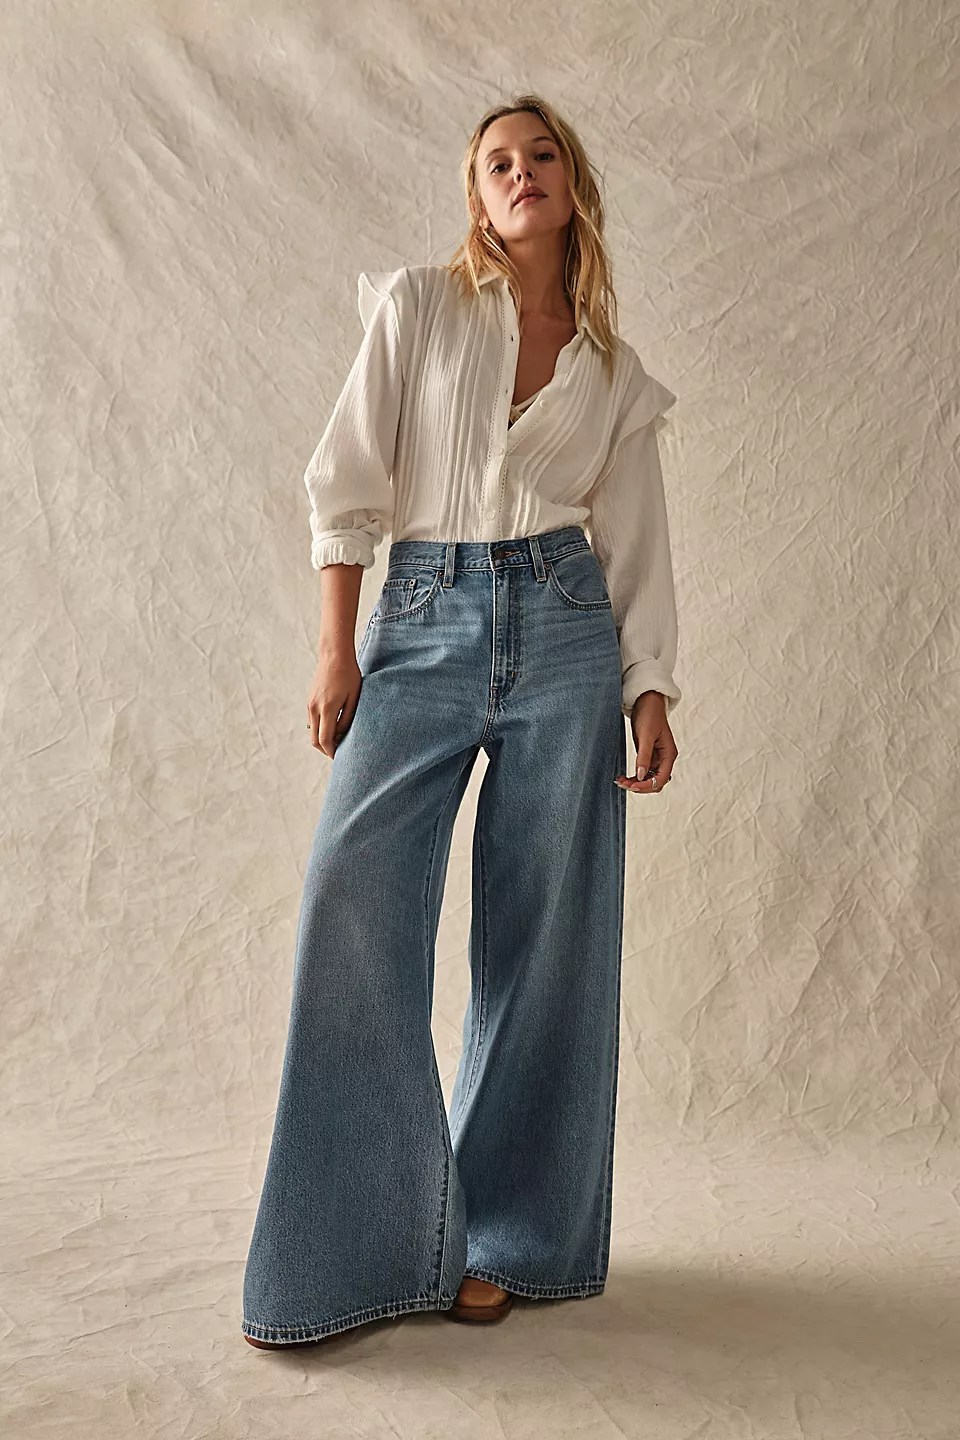 model wearing levis xl flood wide leg jeans and a white flowy top